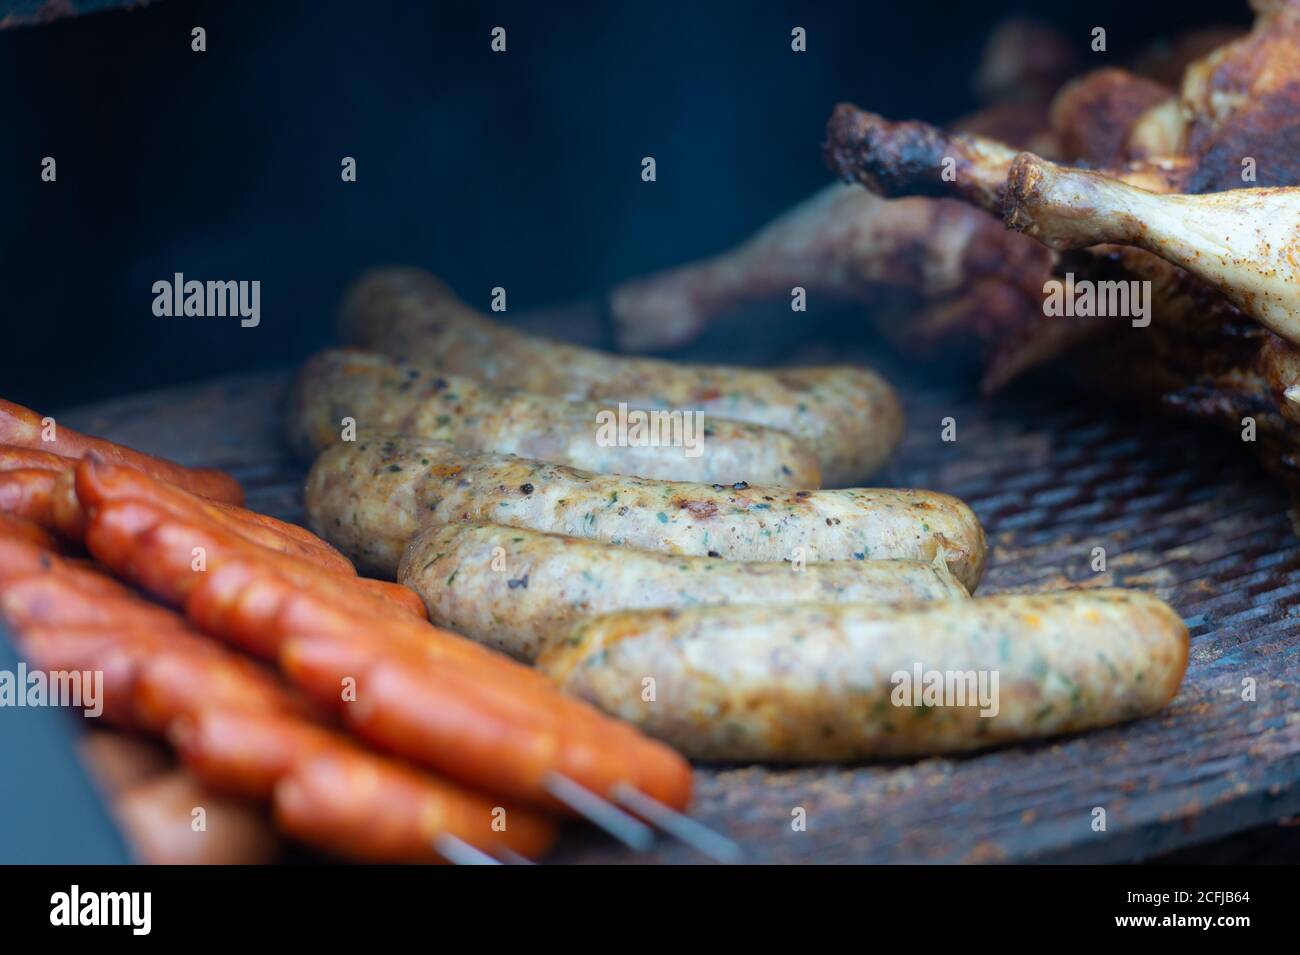 Fresh sausage and hot dogs grilling outdoors on a gas barbecue grill. Stock Photo